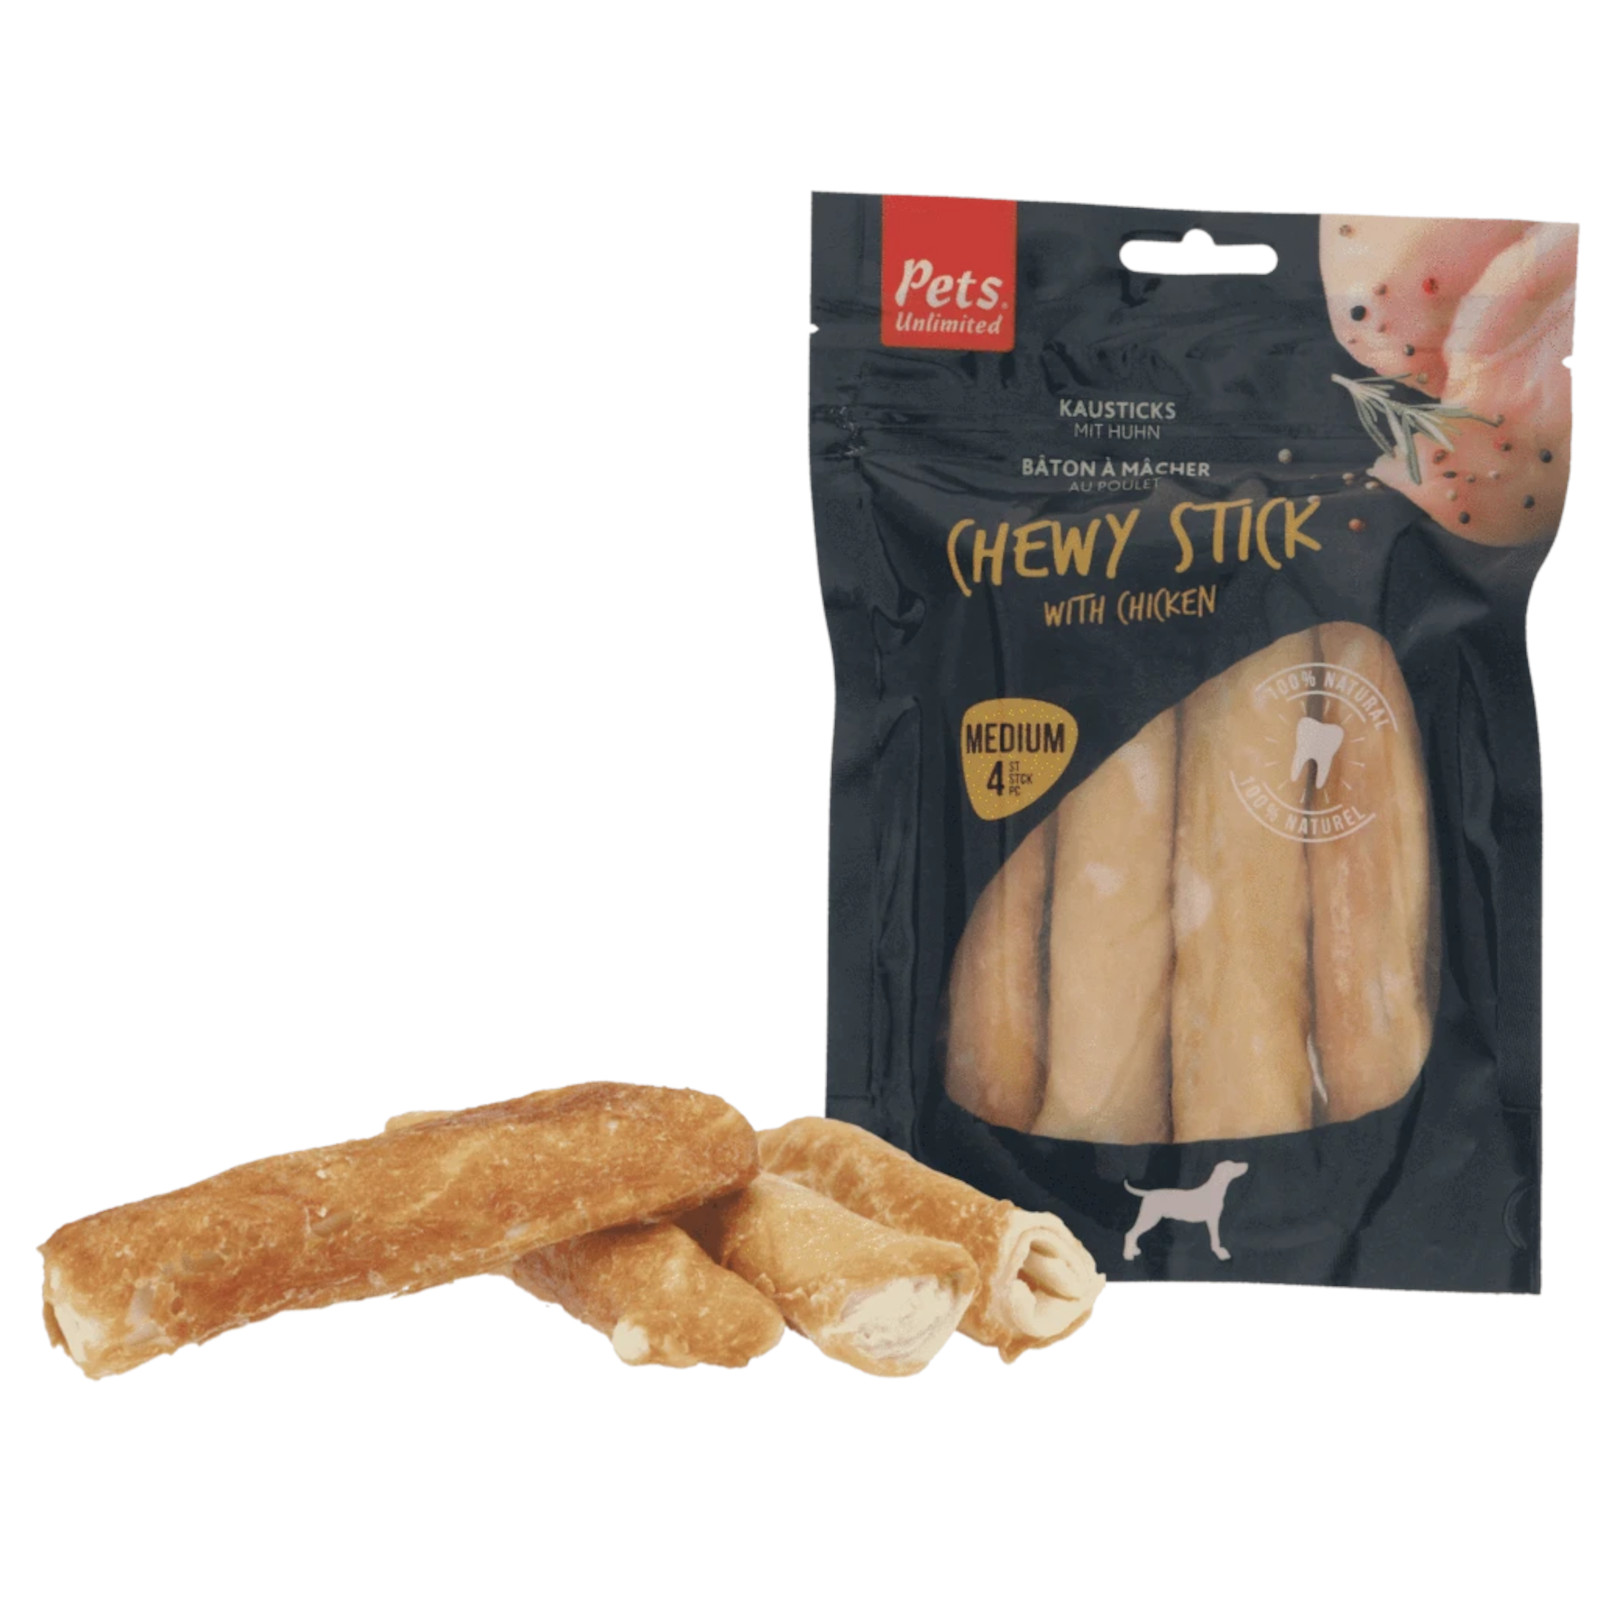 Pets Unlimited Chewy Stick Chicken - Medium 4 Pieces